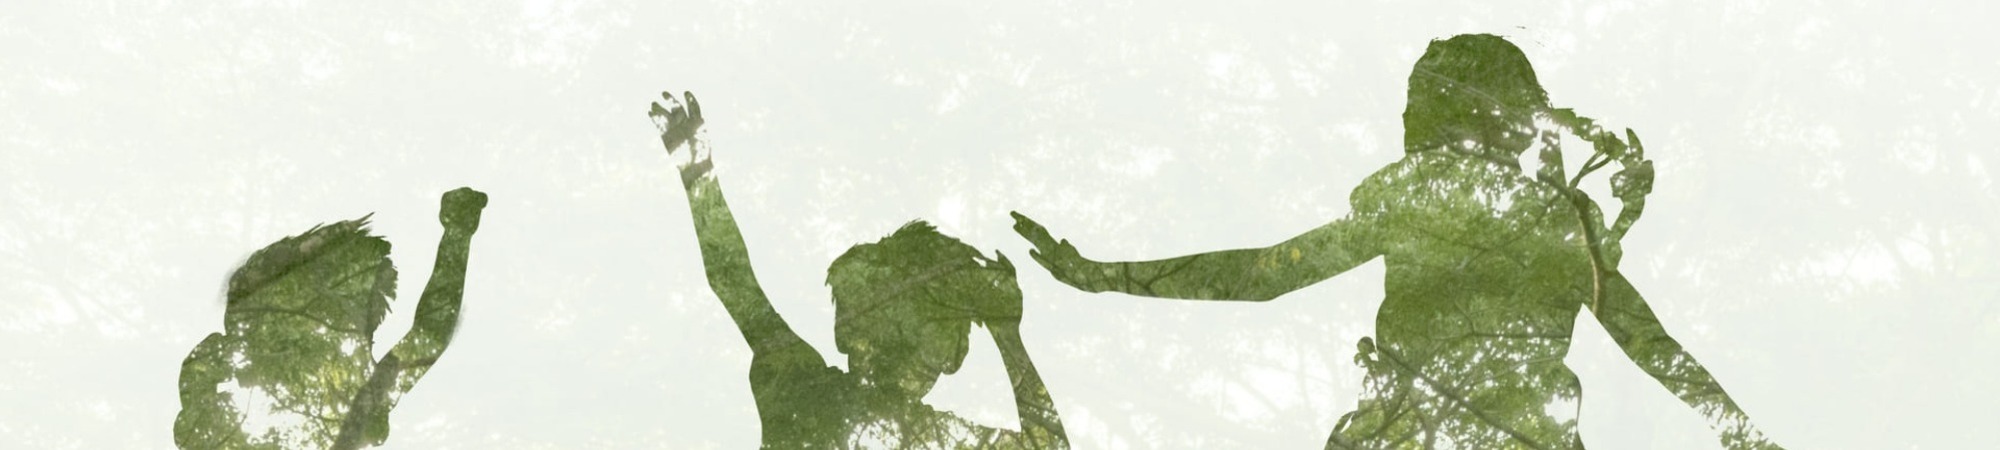 World environment day concept. Double exposure kids jumping and playing on meadow and nature background